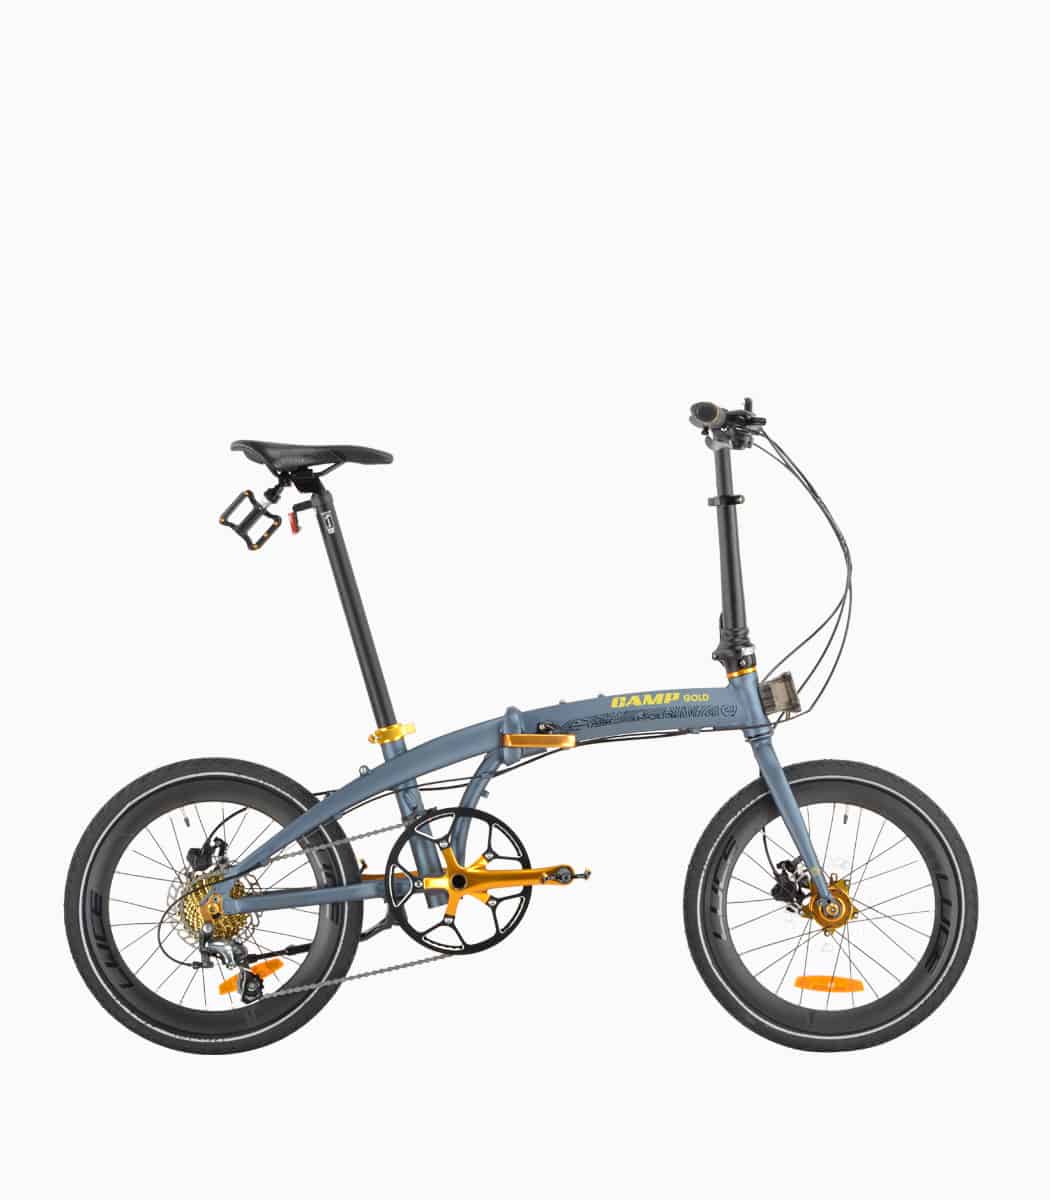 CAMP GOLD SPACE GREY foldable bicycle with reflective tyres right - Home